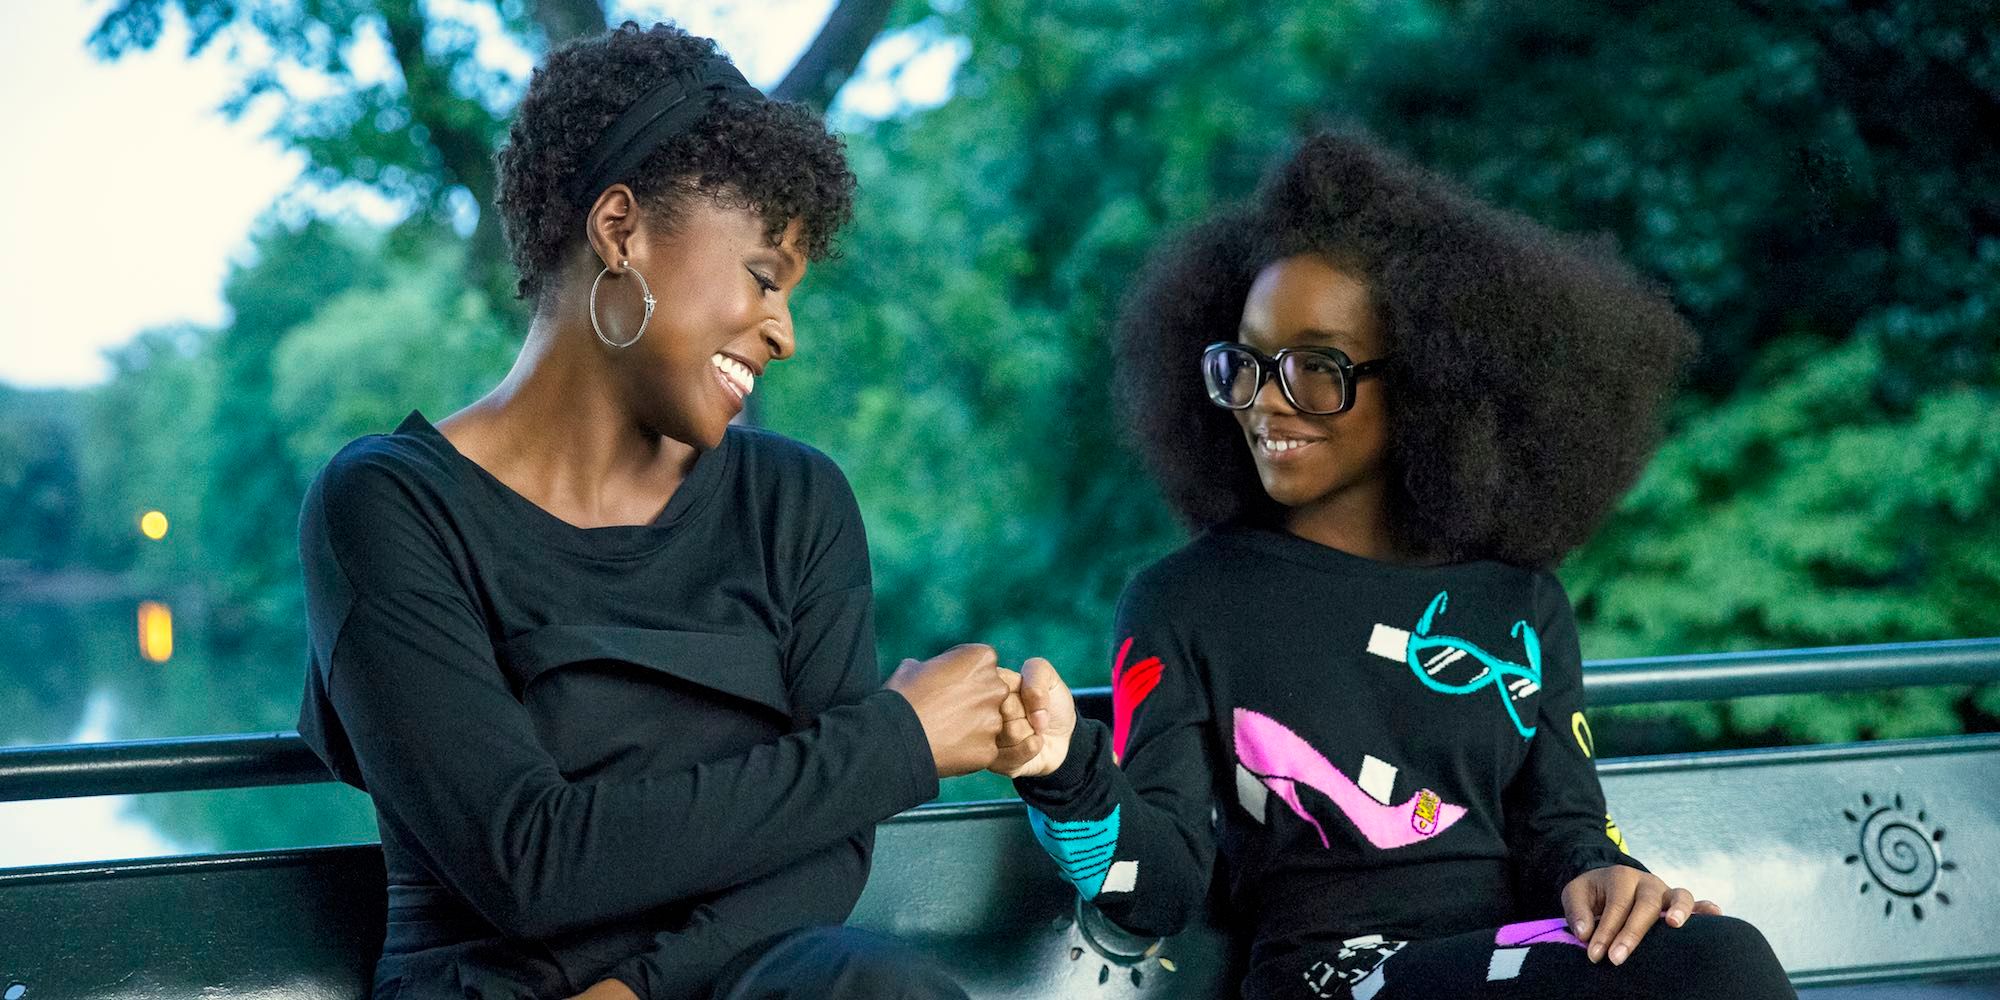 Issa Rae laughing and fist-bumping Marsai Martin in Little